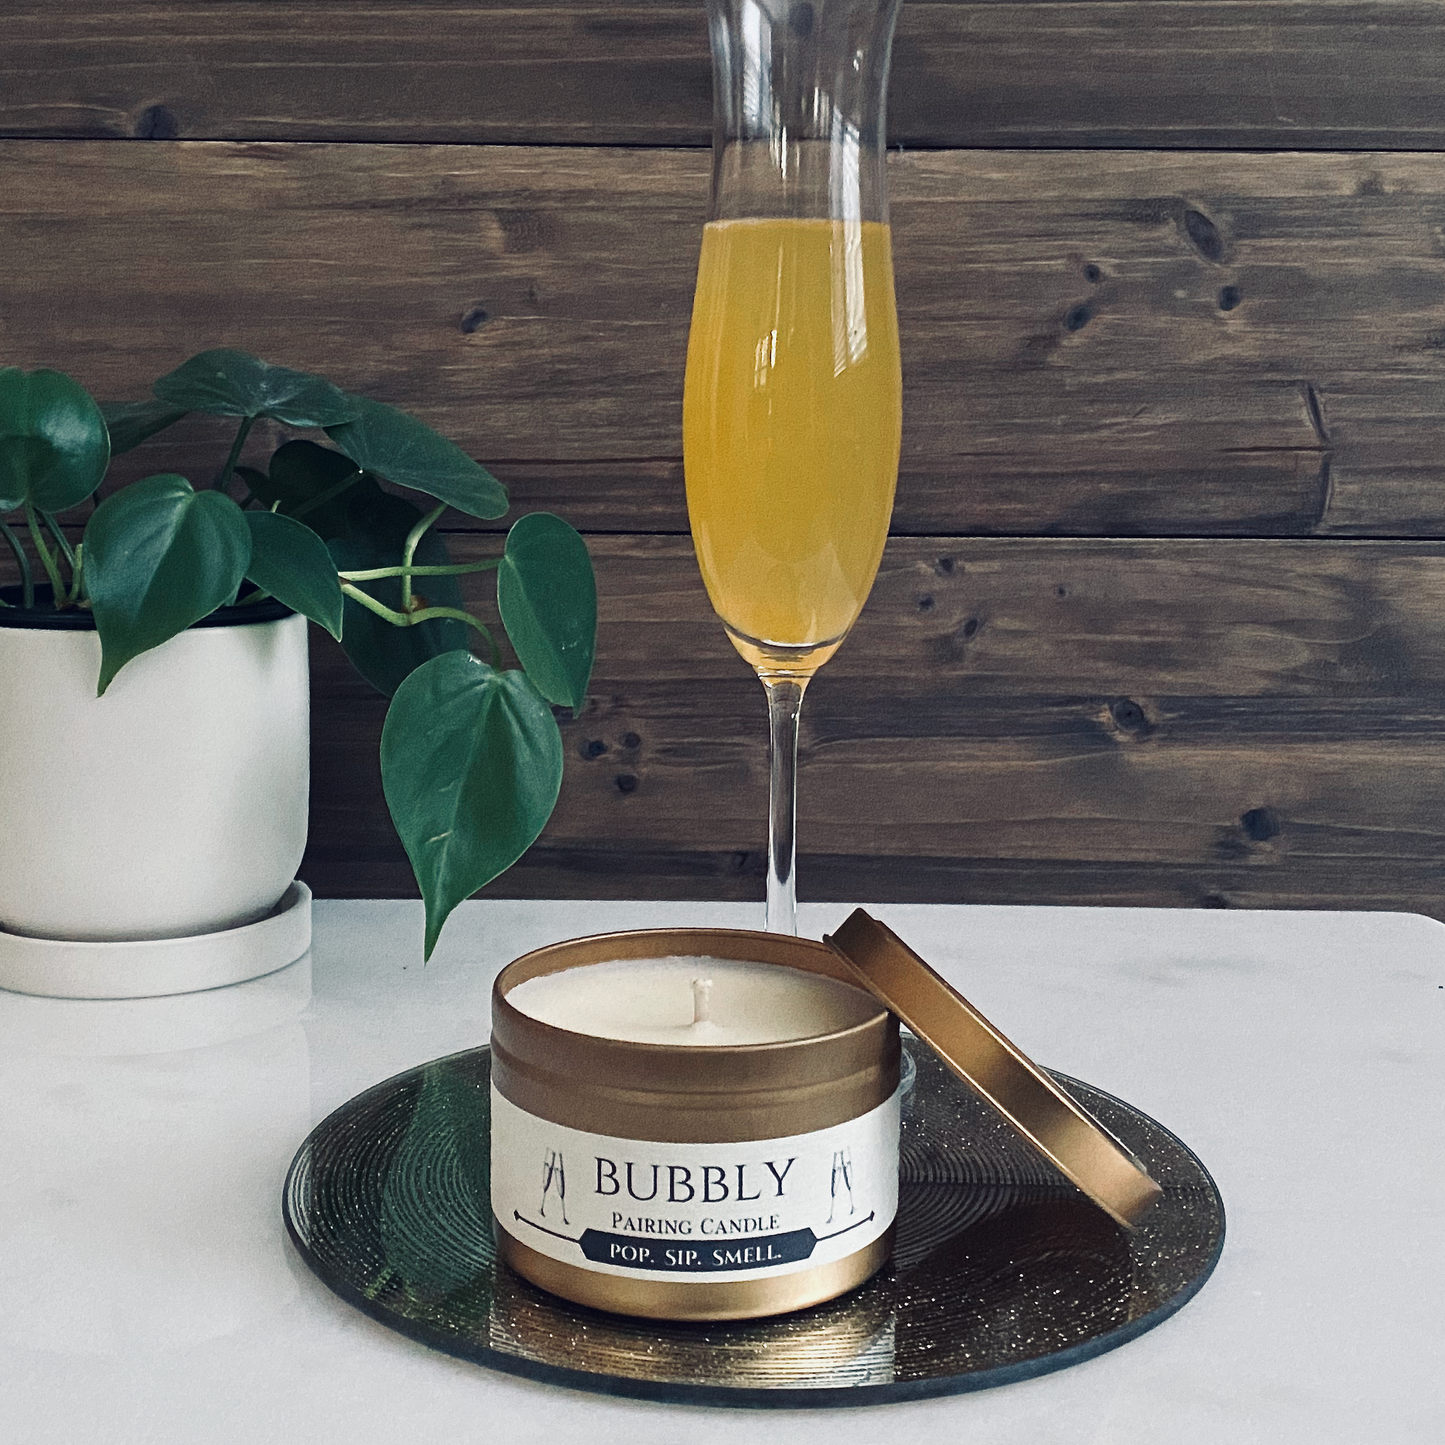 Mimosa Brunch Gift Idea - Champagne Bubbly Pairing Candle